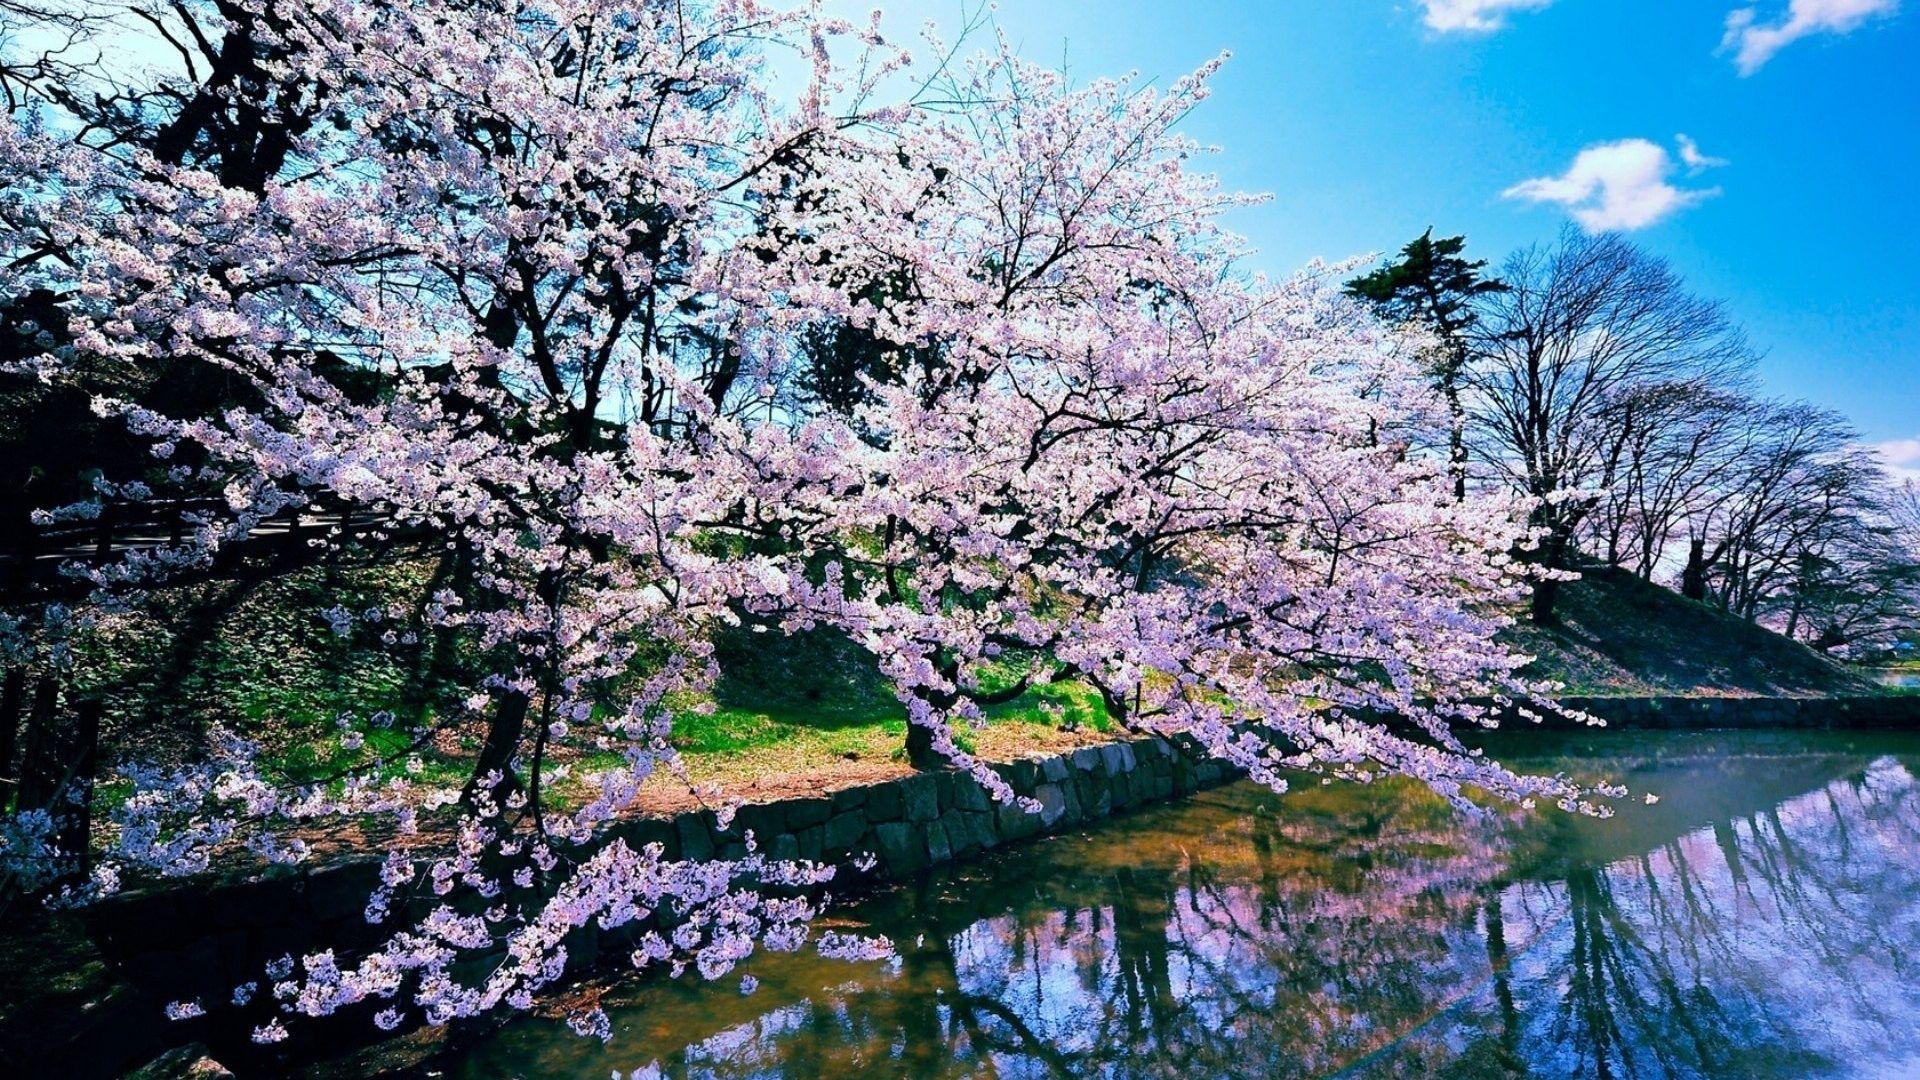 Japan Cherry Blossom Tree Wallpapers - Top Free Japan Cherry Blossom